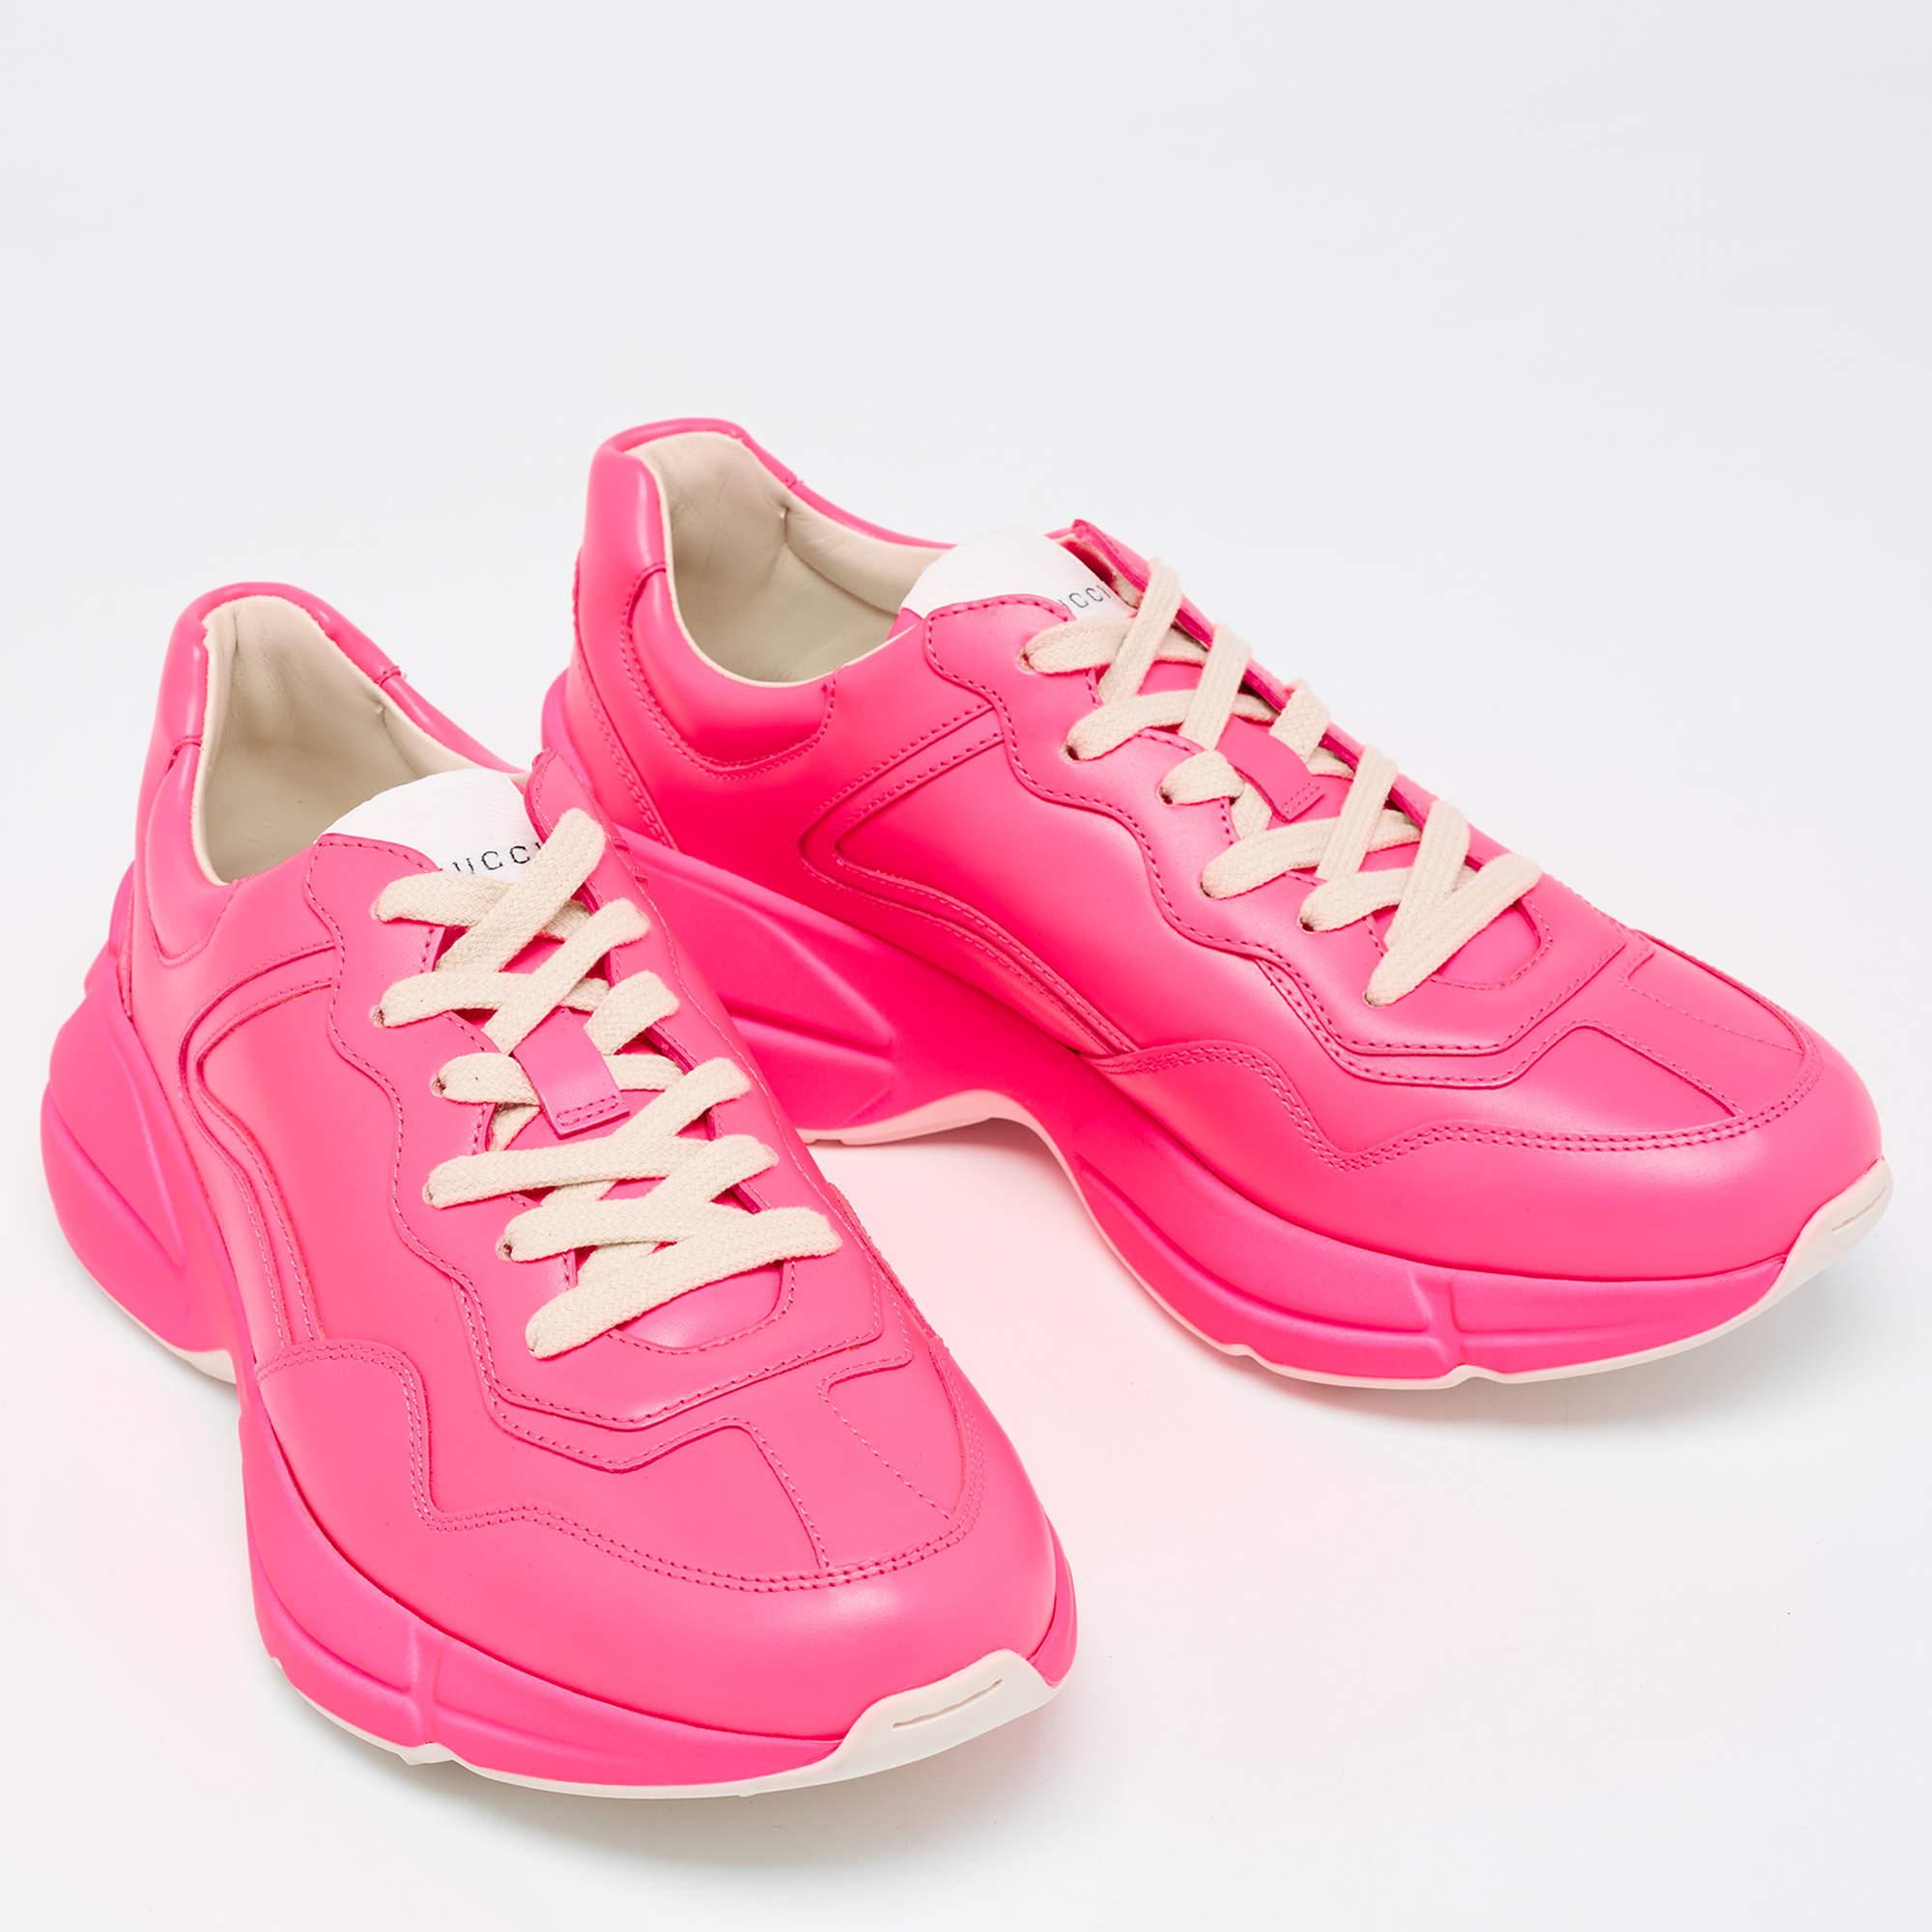 Women's Gucci Neon Pink Leather Rhyton Sneakers Size 39 For Sale